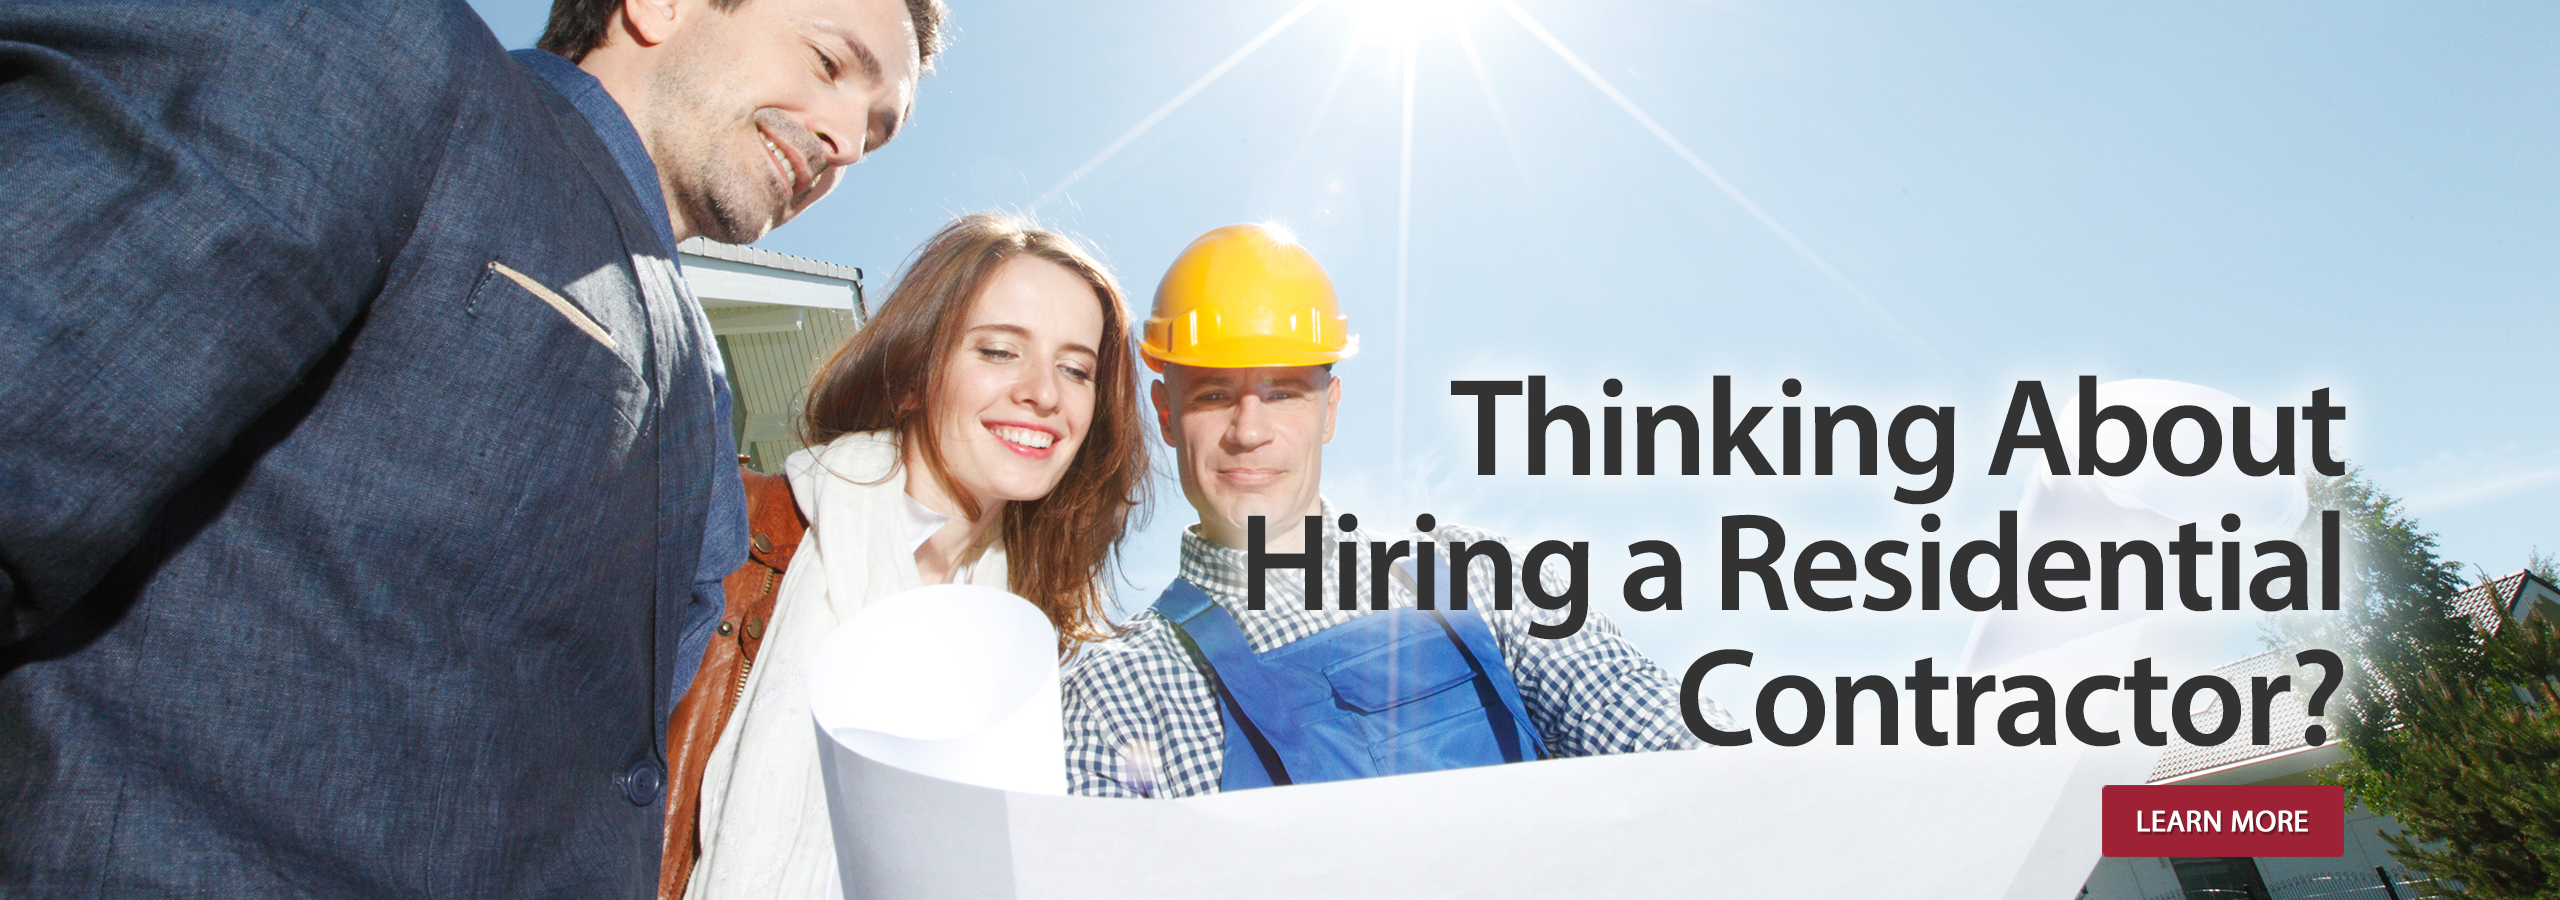 Thinking about hiring a Residential Contractor?